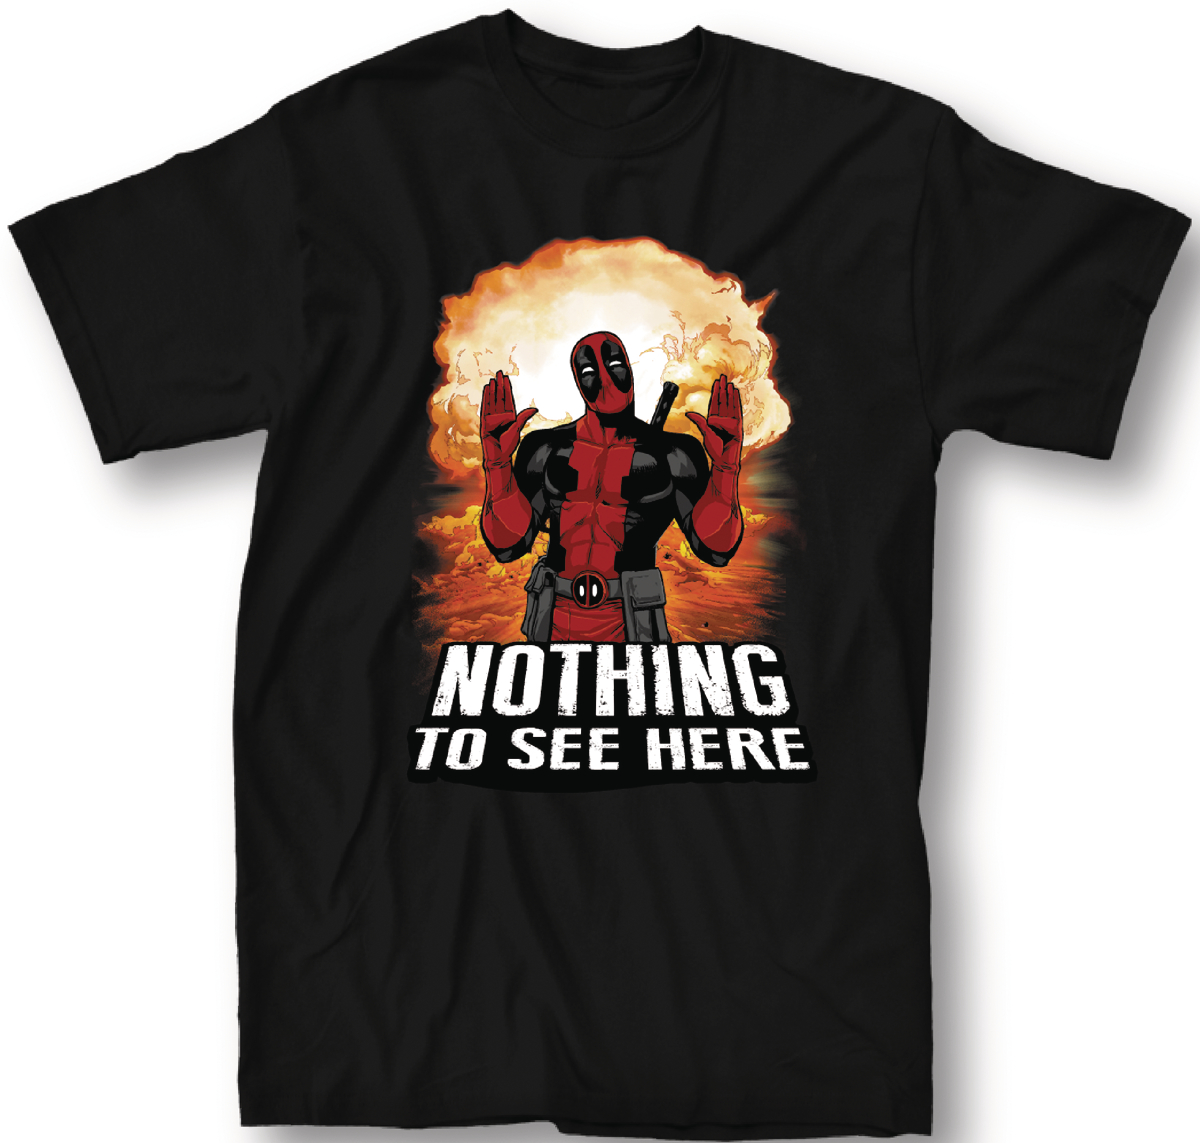 DEADPOOL NOTHING TO SEE HERE BLACK T/S LG